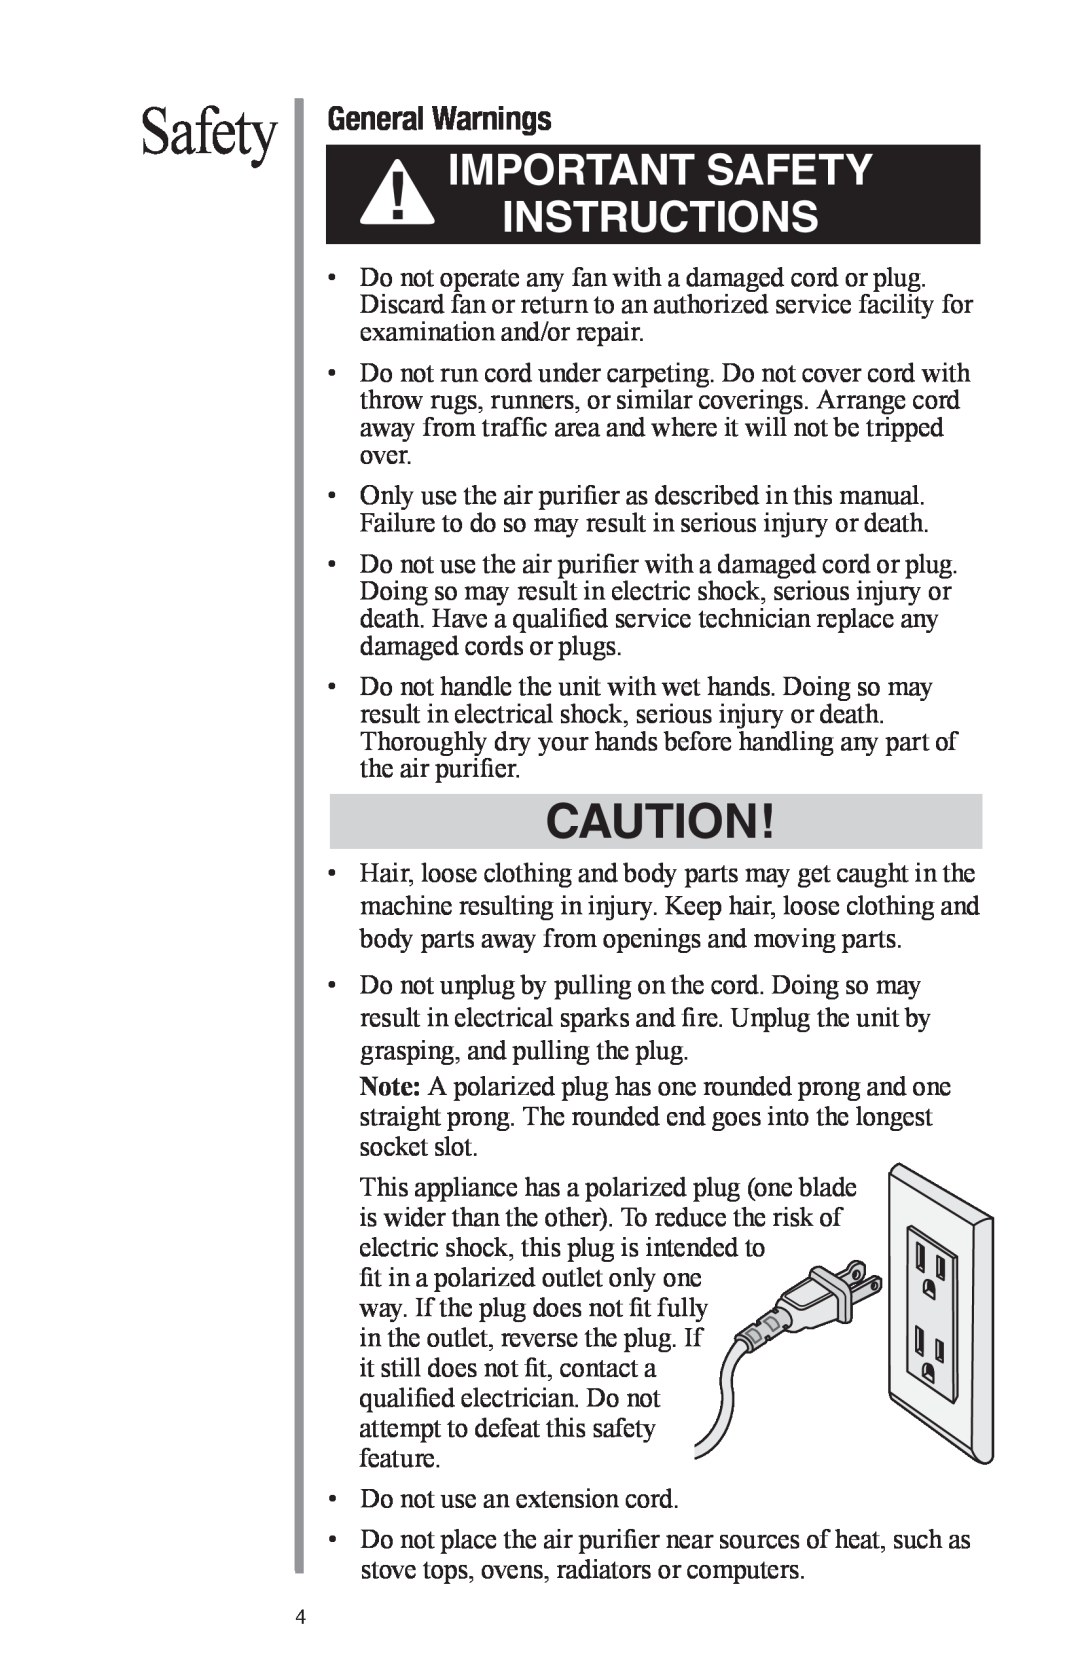 Oreck Air manual General Warnings, Important Safety Instructions 